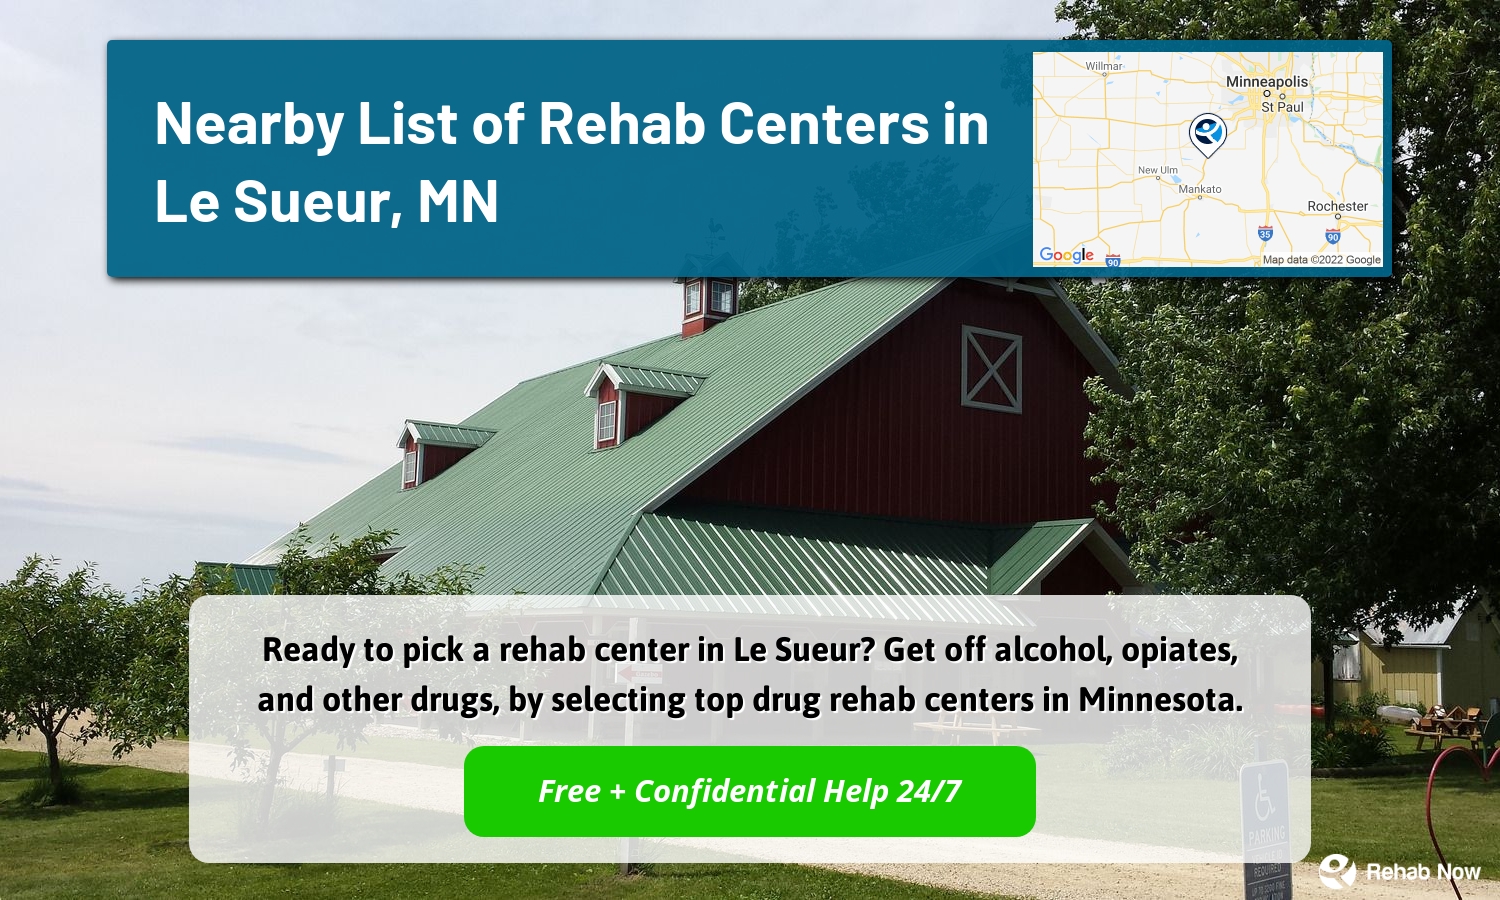 Ready to pick a rehab center in Le Sueur? Get off alcohol, opiates, and other drugs, by selecting top drug rehab centers in Minnesota.